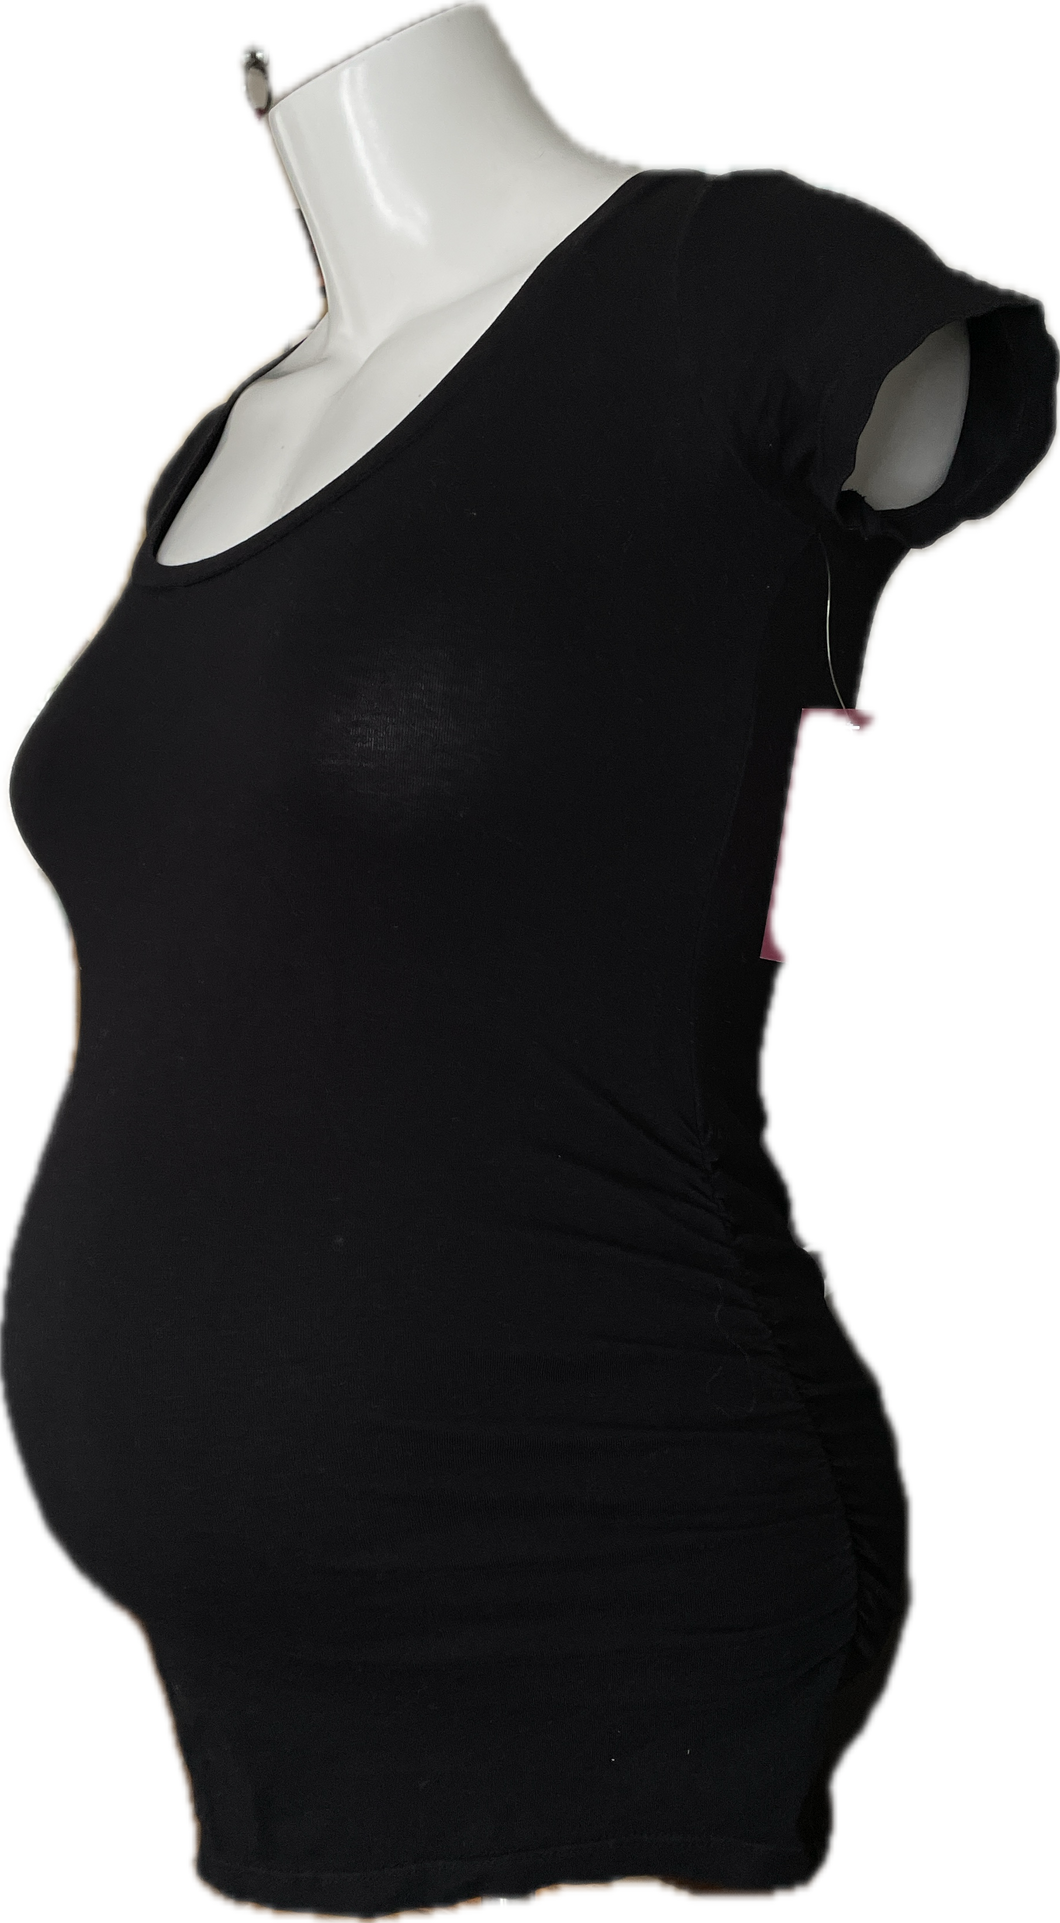 XS Old Navy Maternity Short Sleeve top in Black